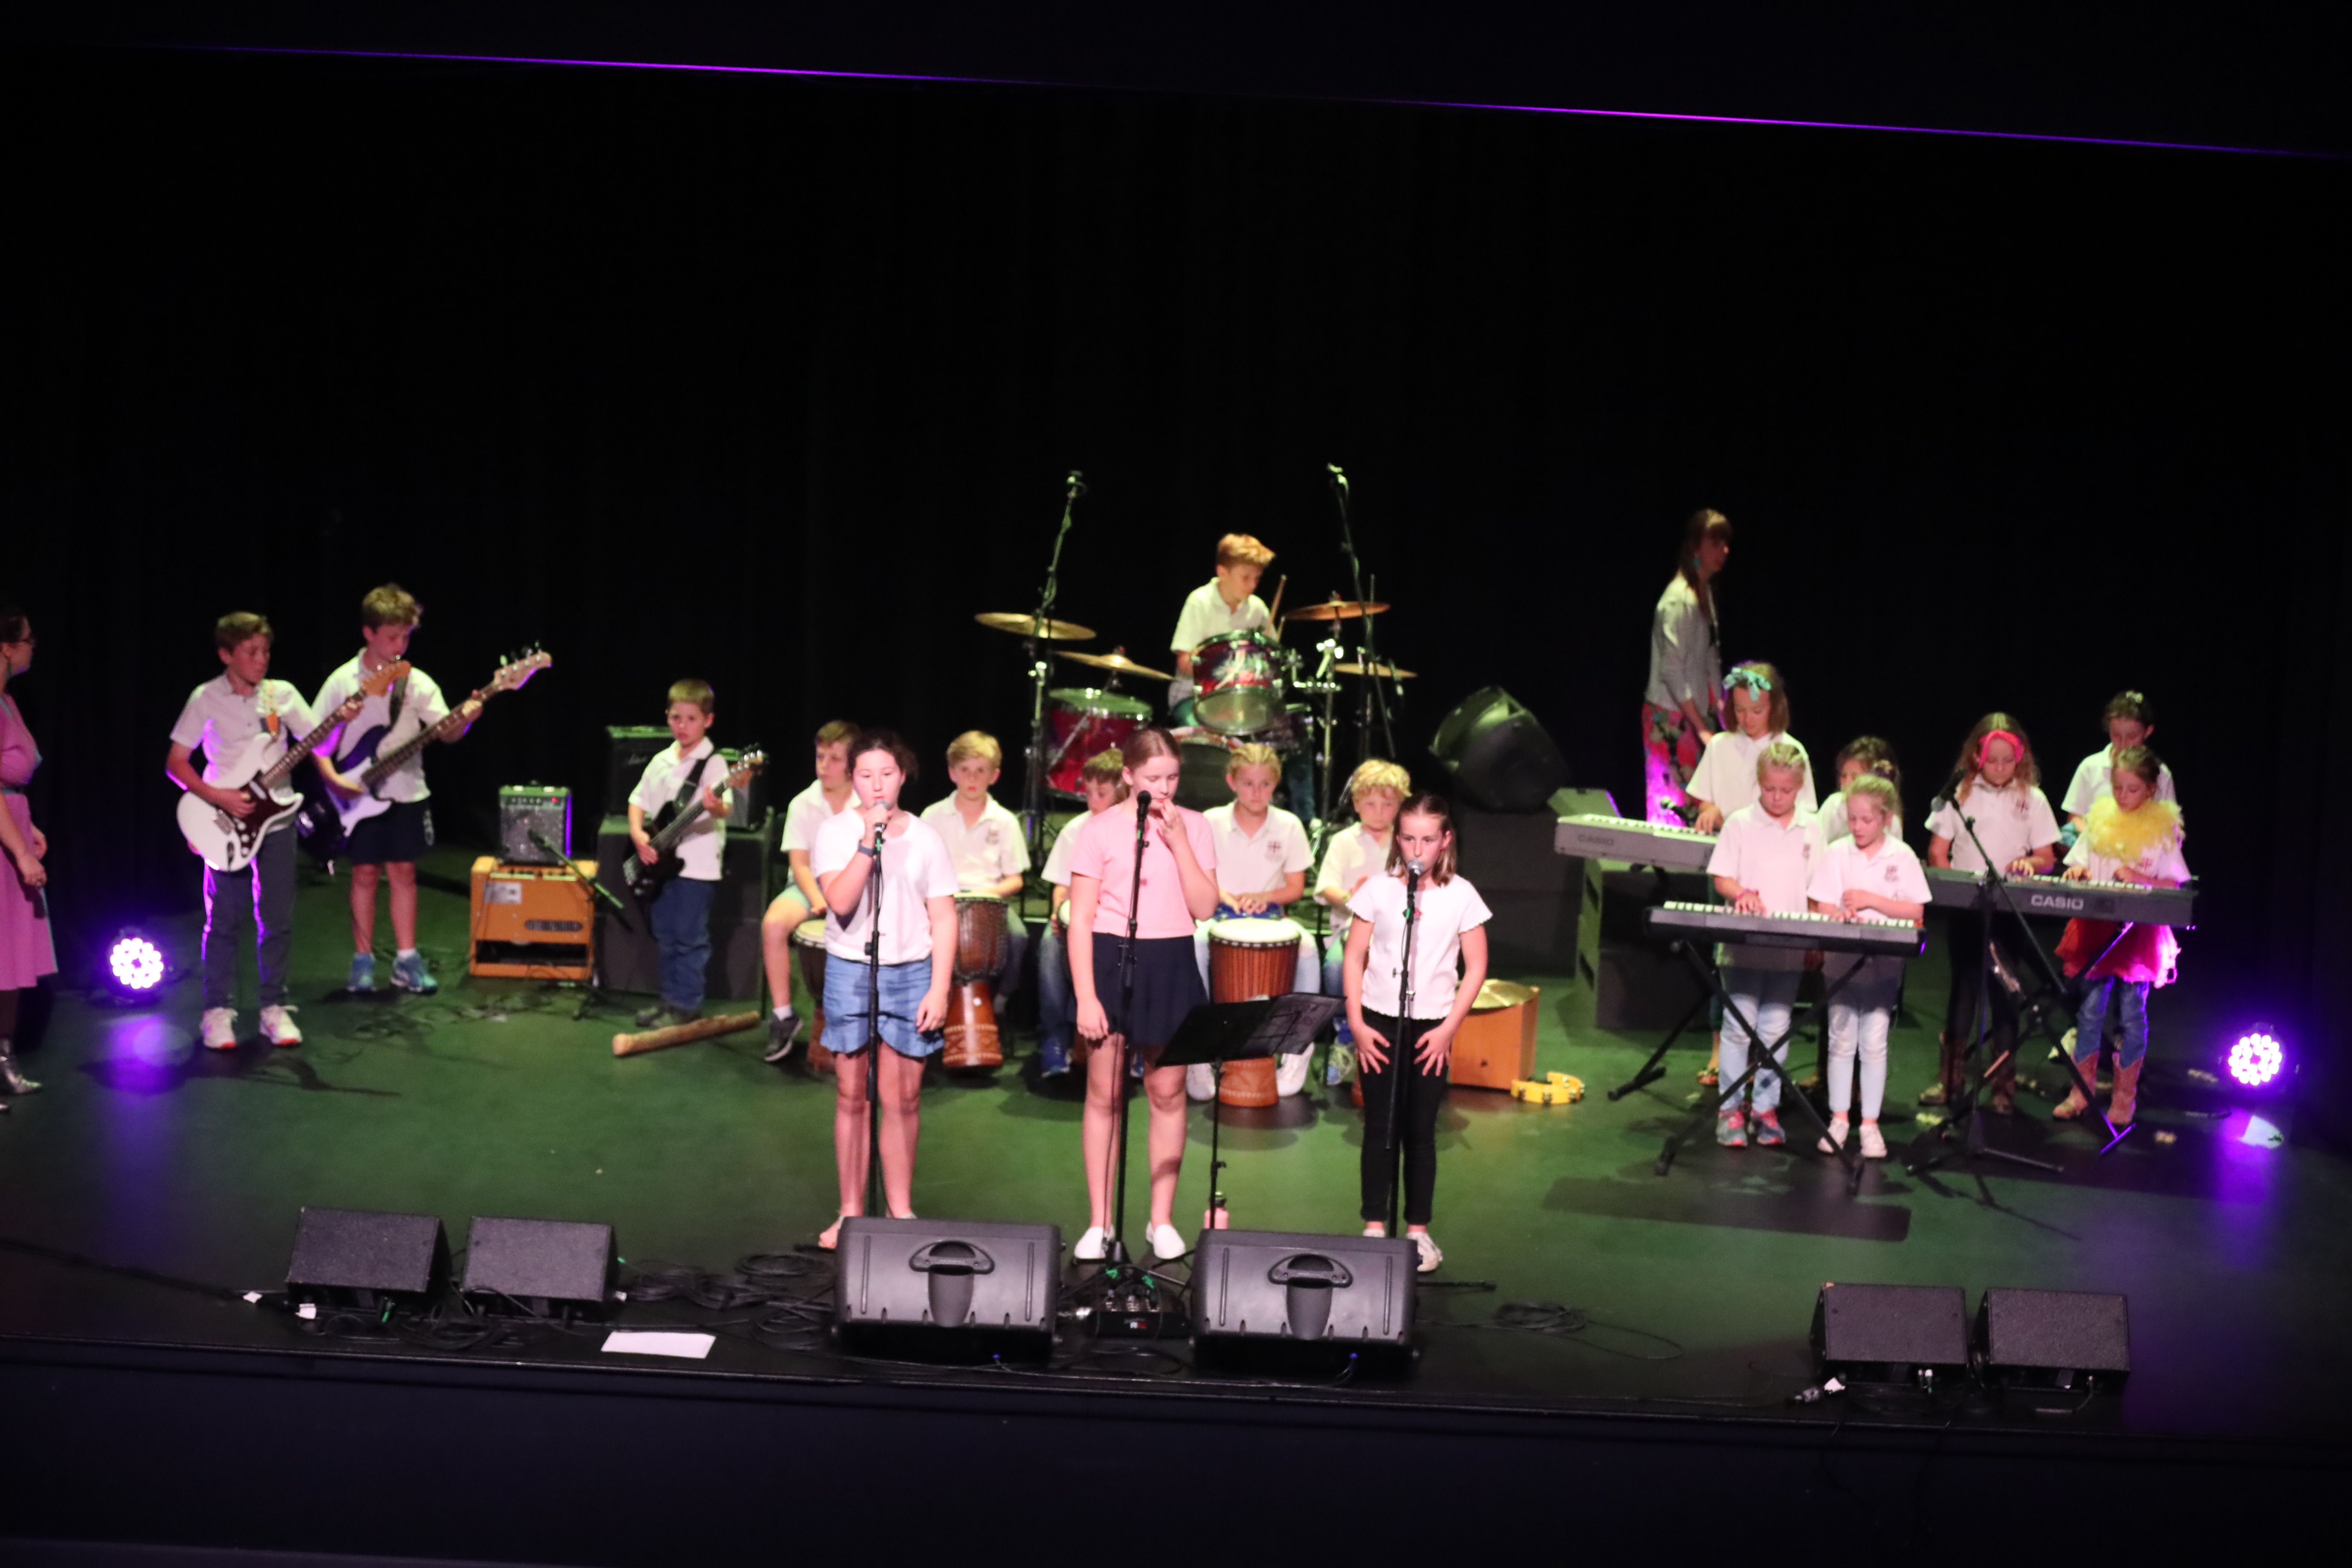 School band on stage performing at festival